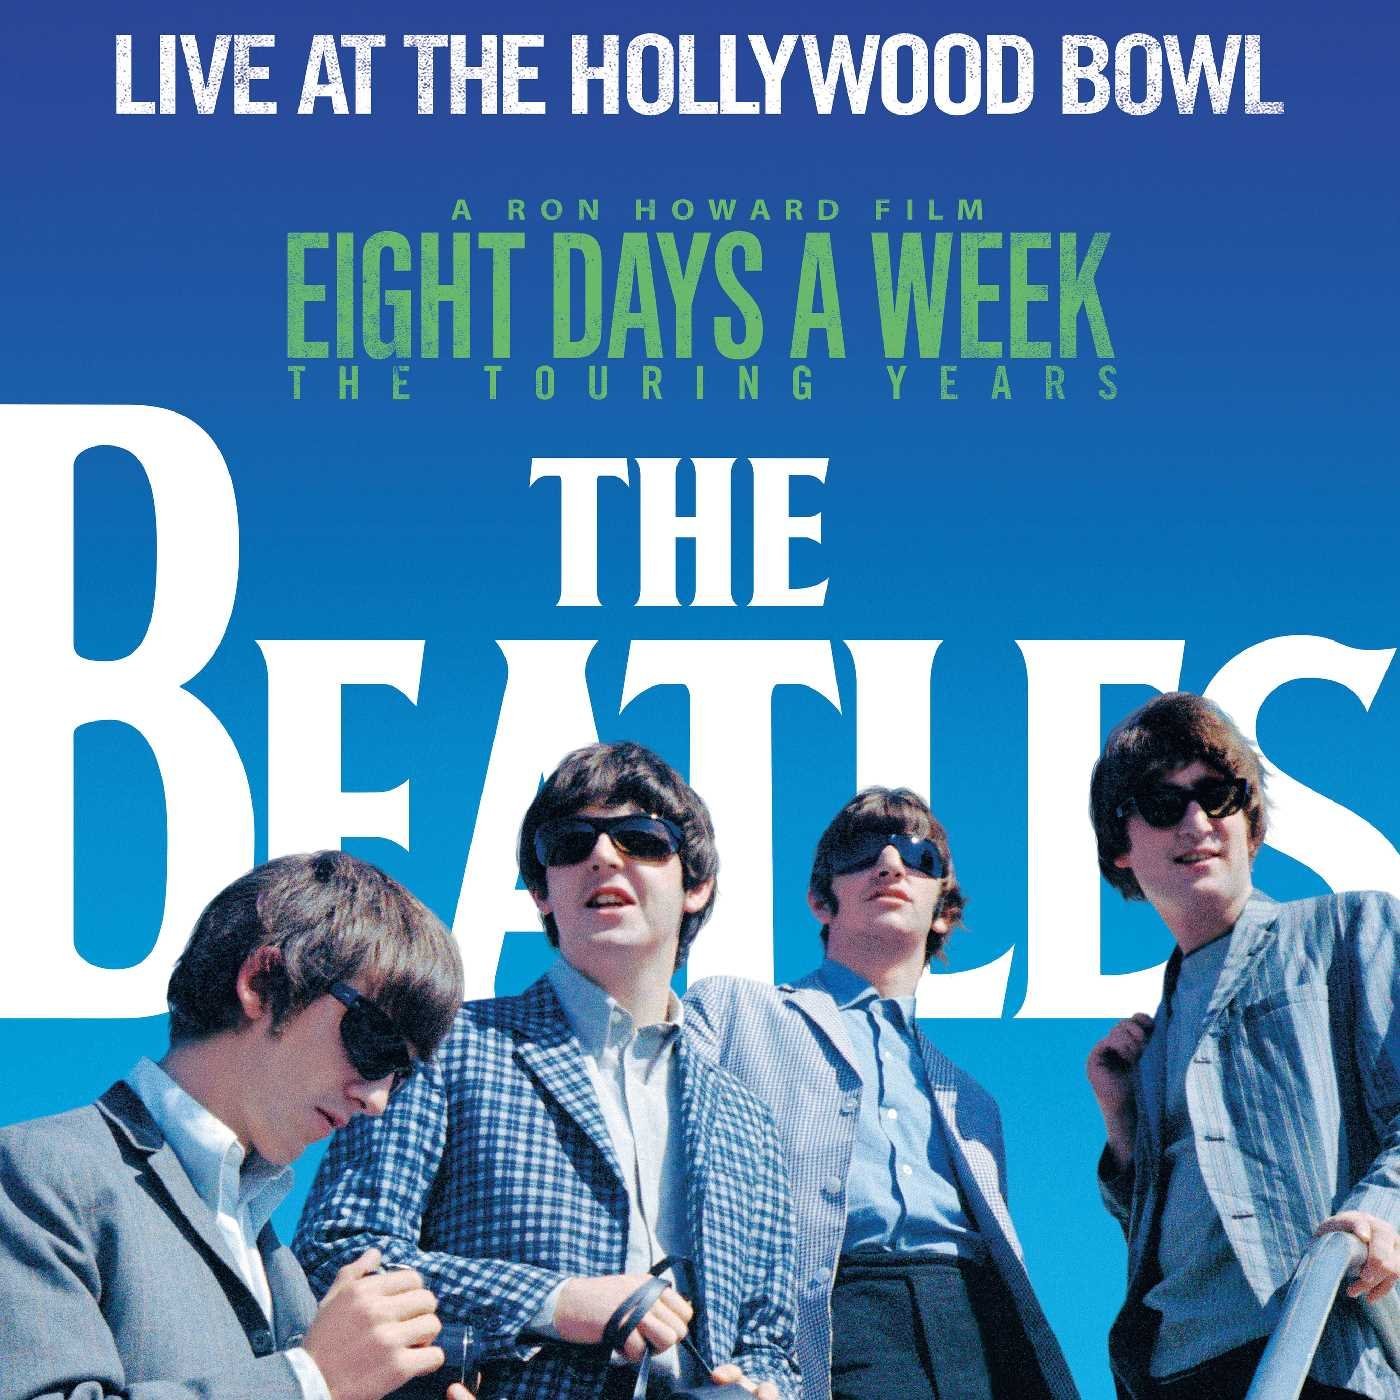 The Beatles - Live At The Hollywood Bowl | The Beatles